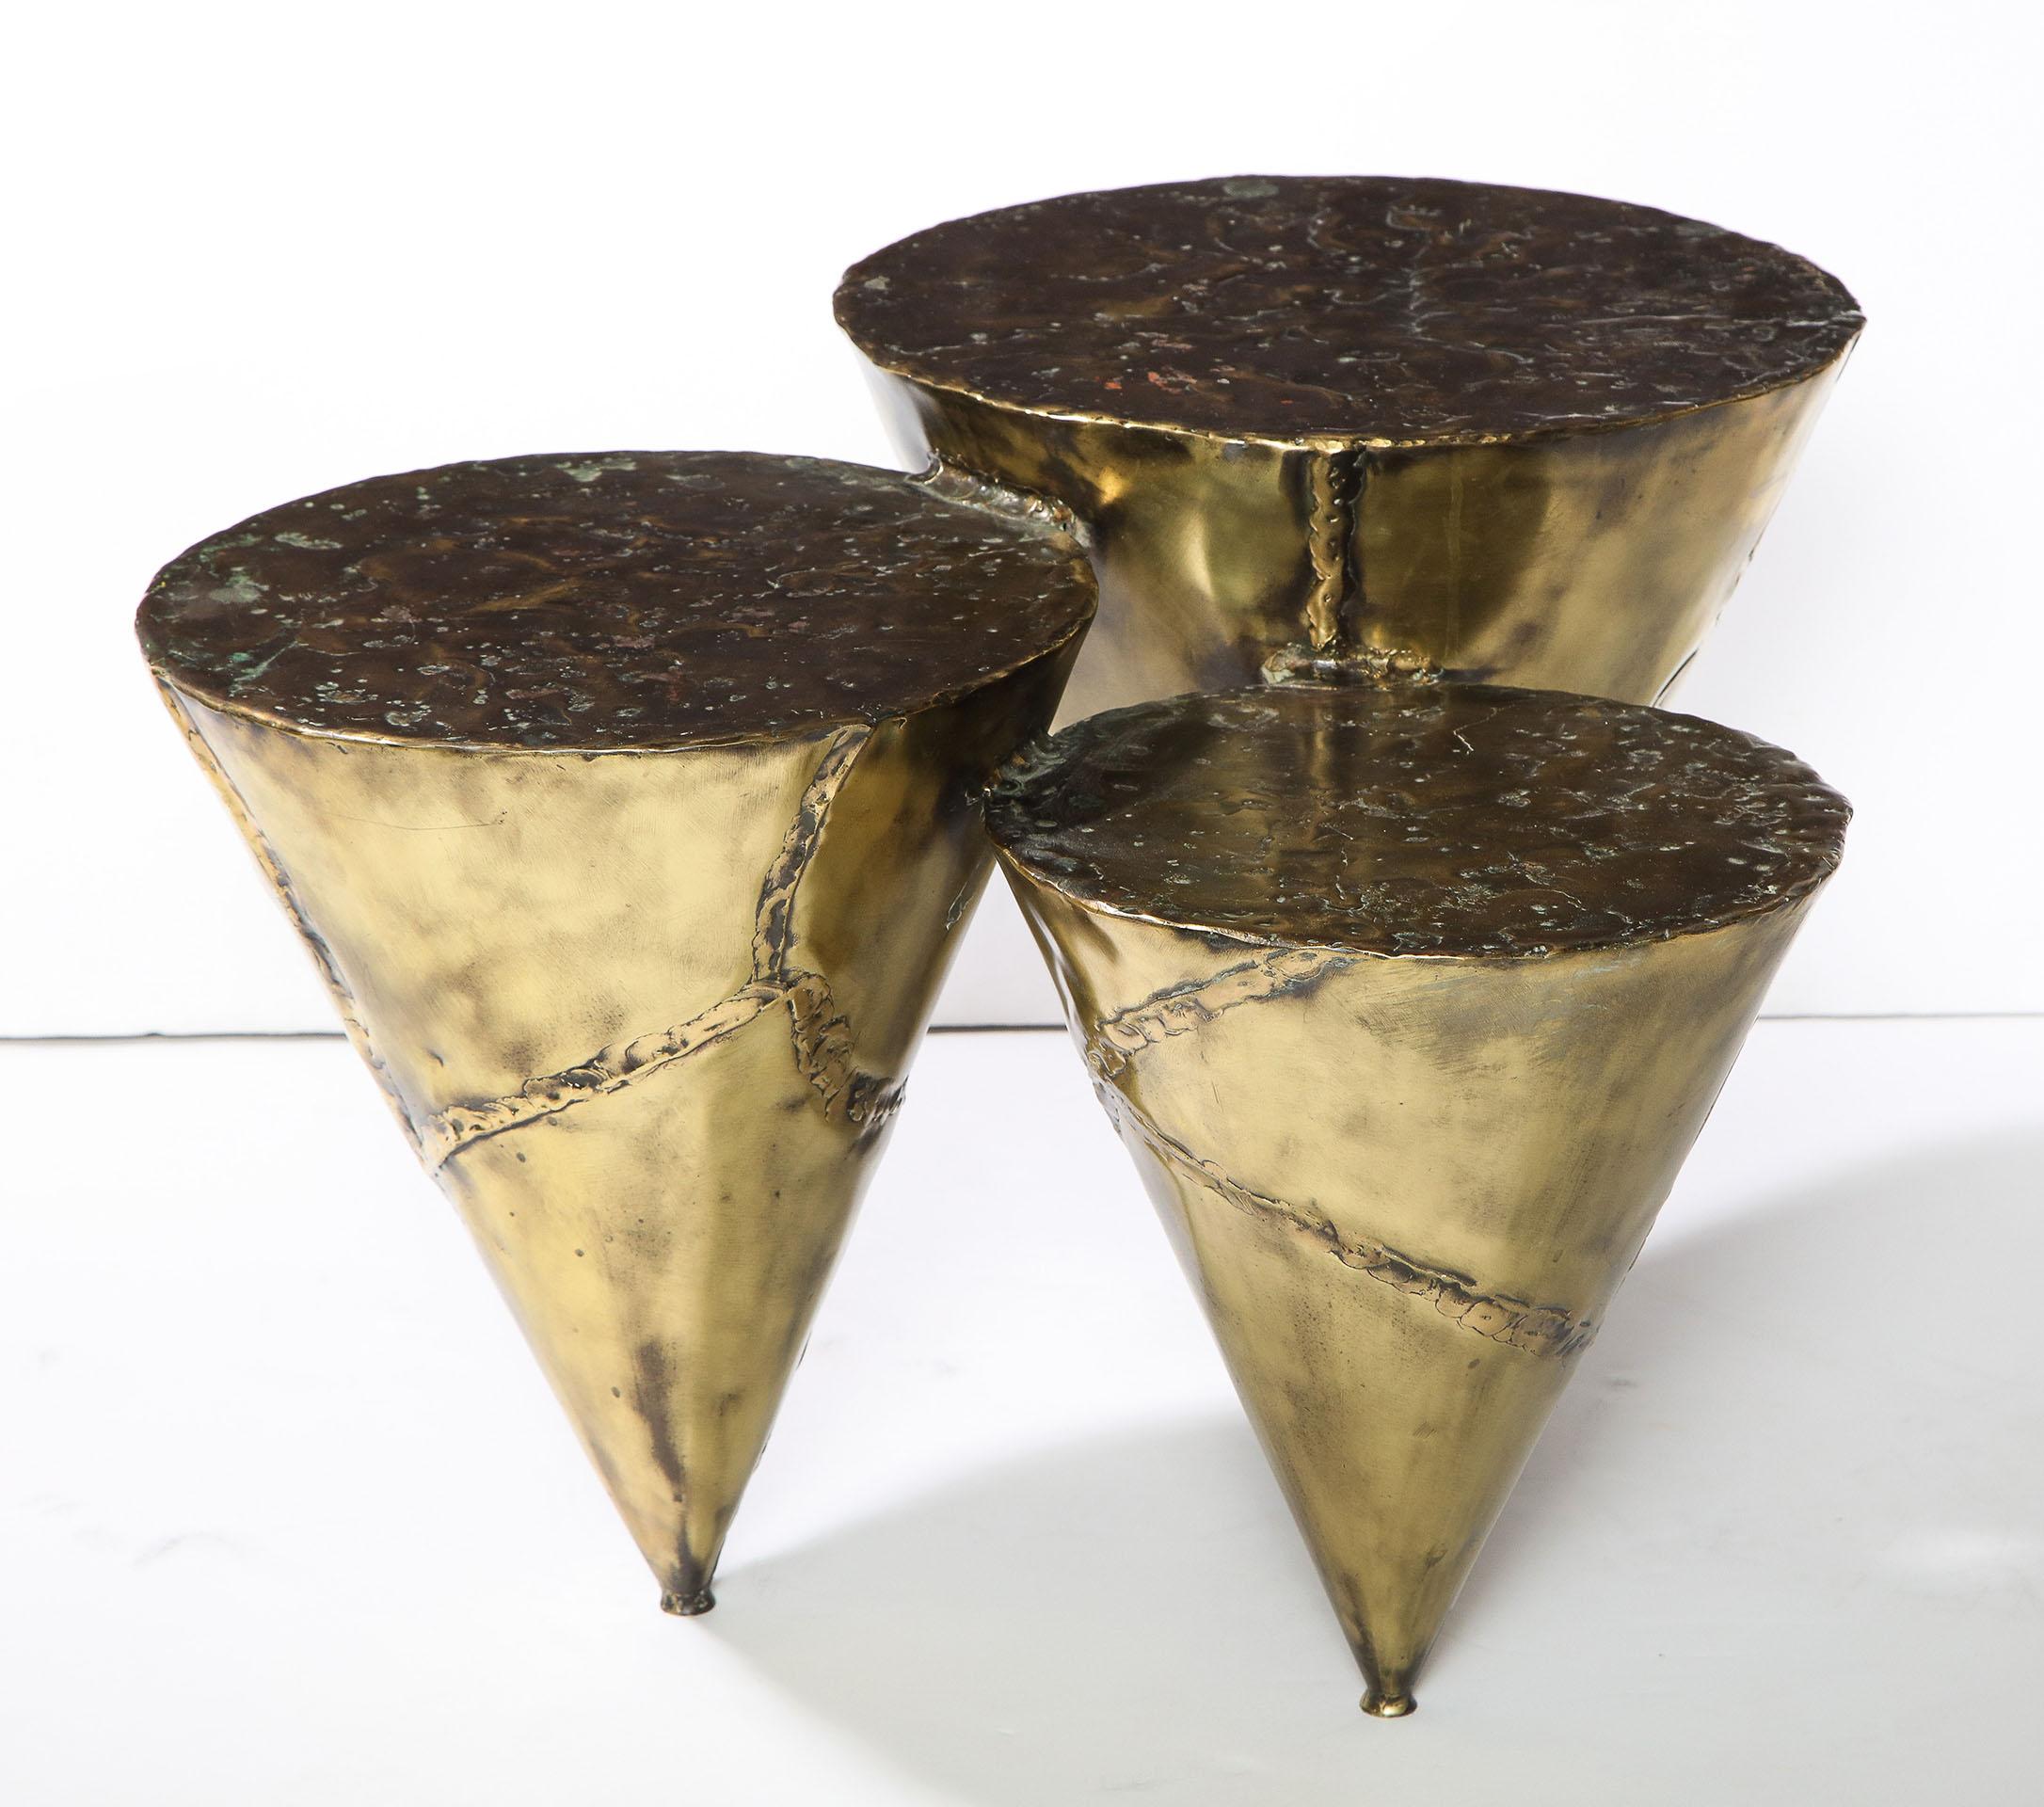 American Fabricated Brass and Bronze Vintage End Table, by Silas Seandel